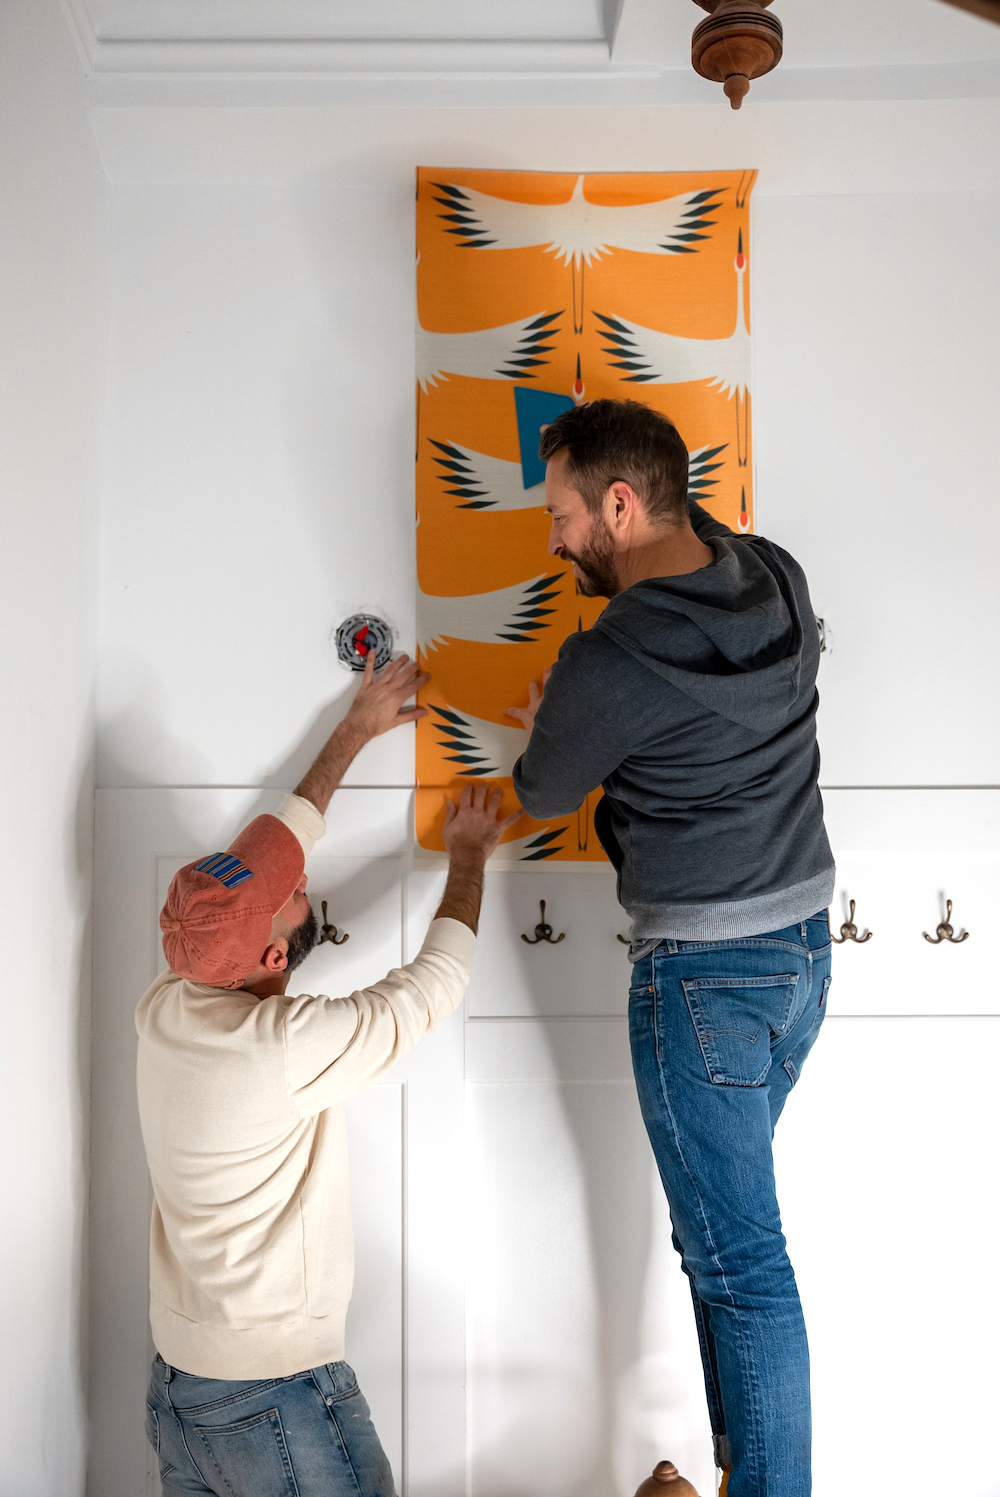 Two men working together to install dark yellow wallpaper with white cranes at the end of a white hallway. Wallpaper panel is being installed above an empty coat-hook shelf